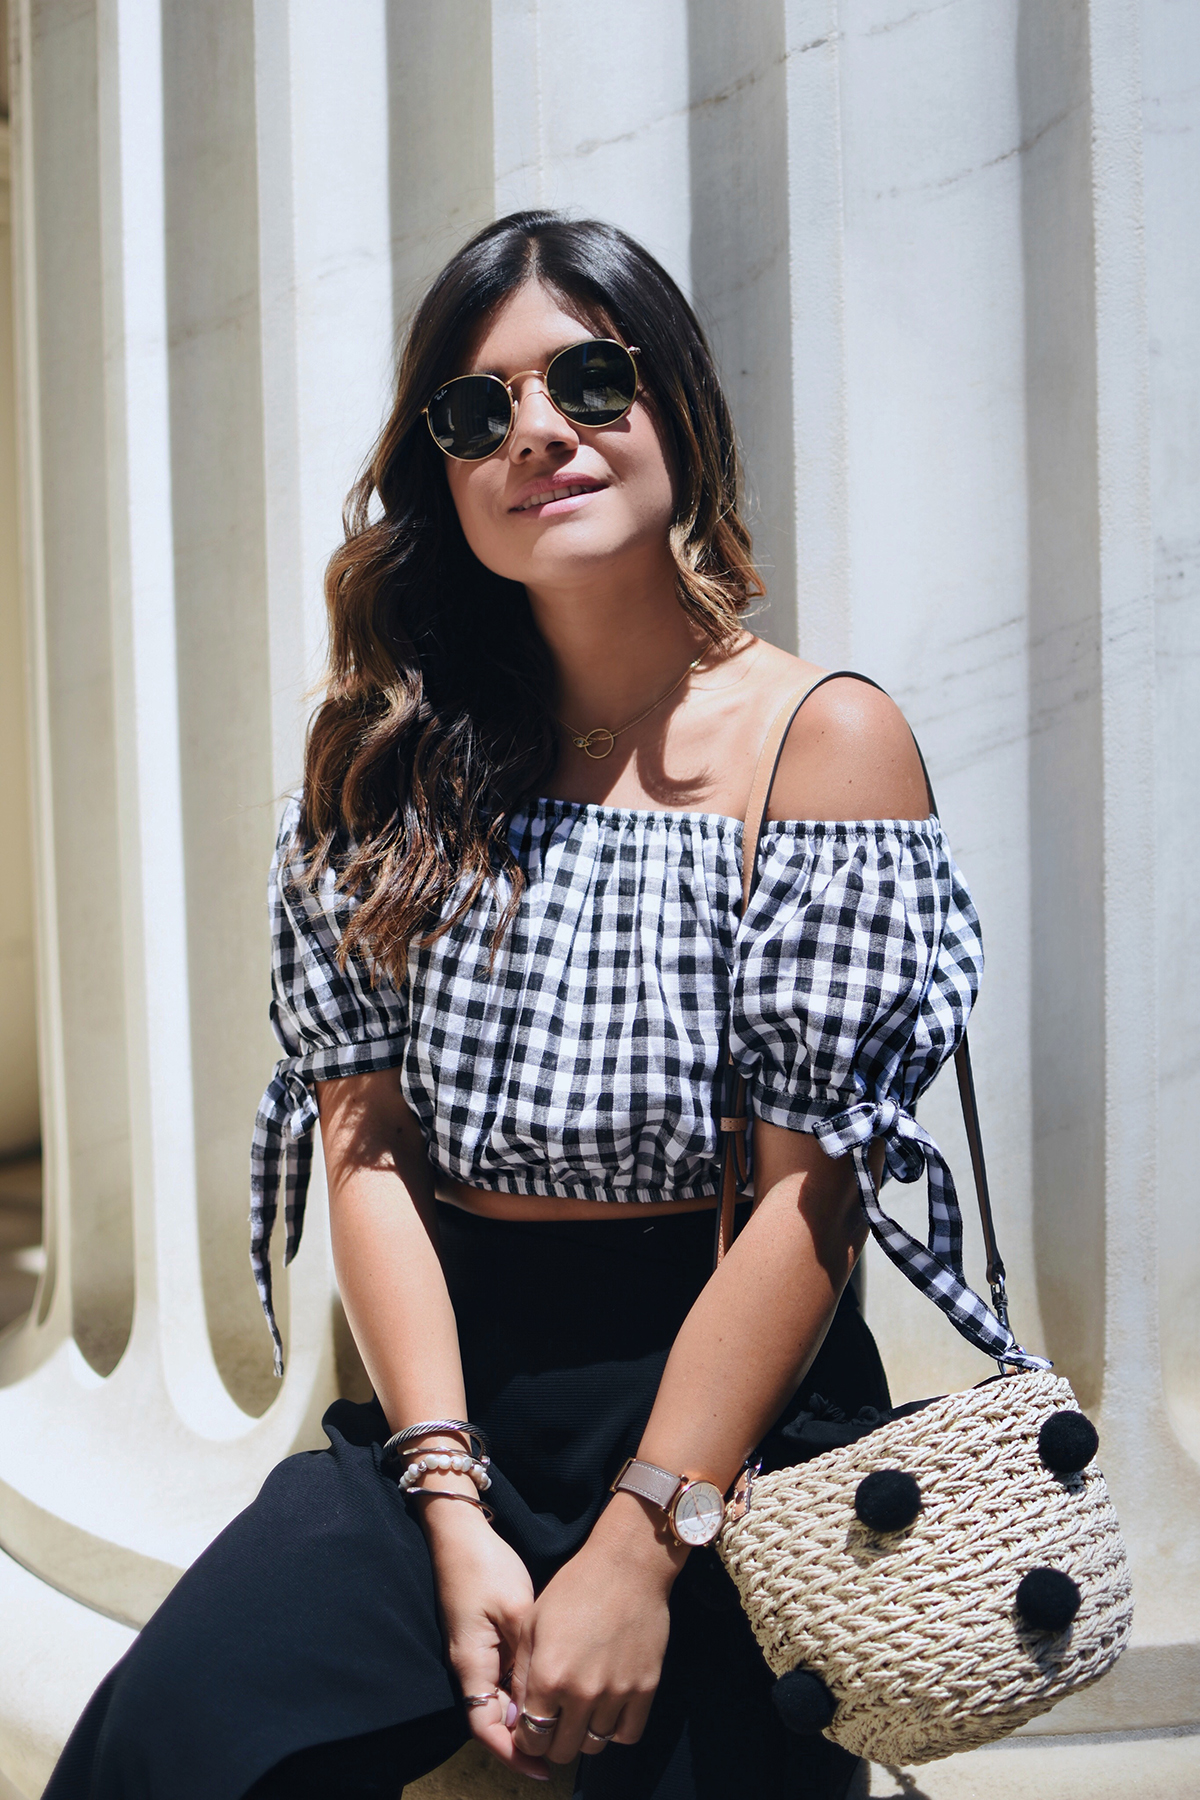 Carolina Hellal of Chic Talk wearing a Missguided gingham top, topshop pants, forever 21 sandals and Rebecca Minkoff bag